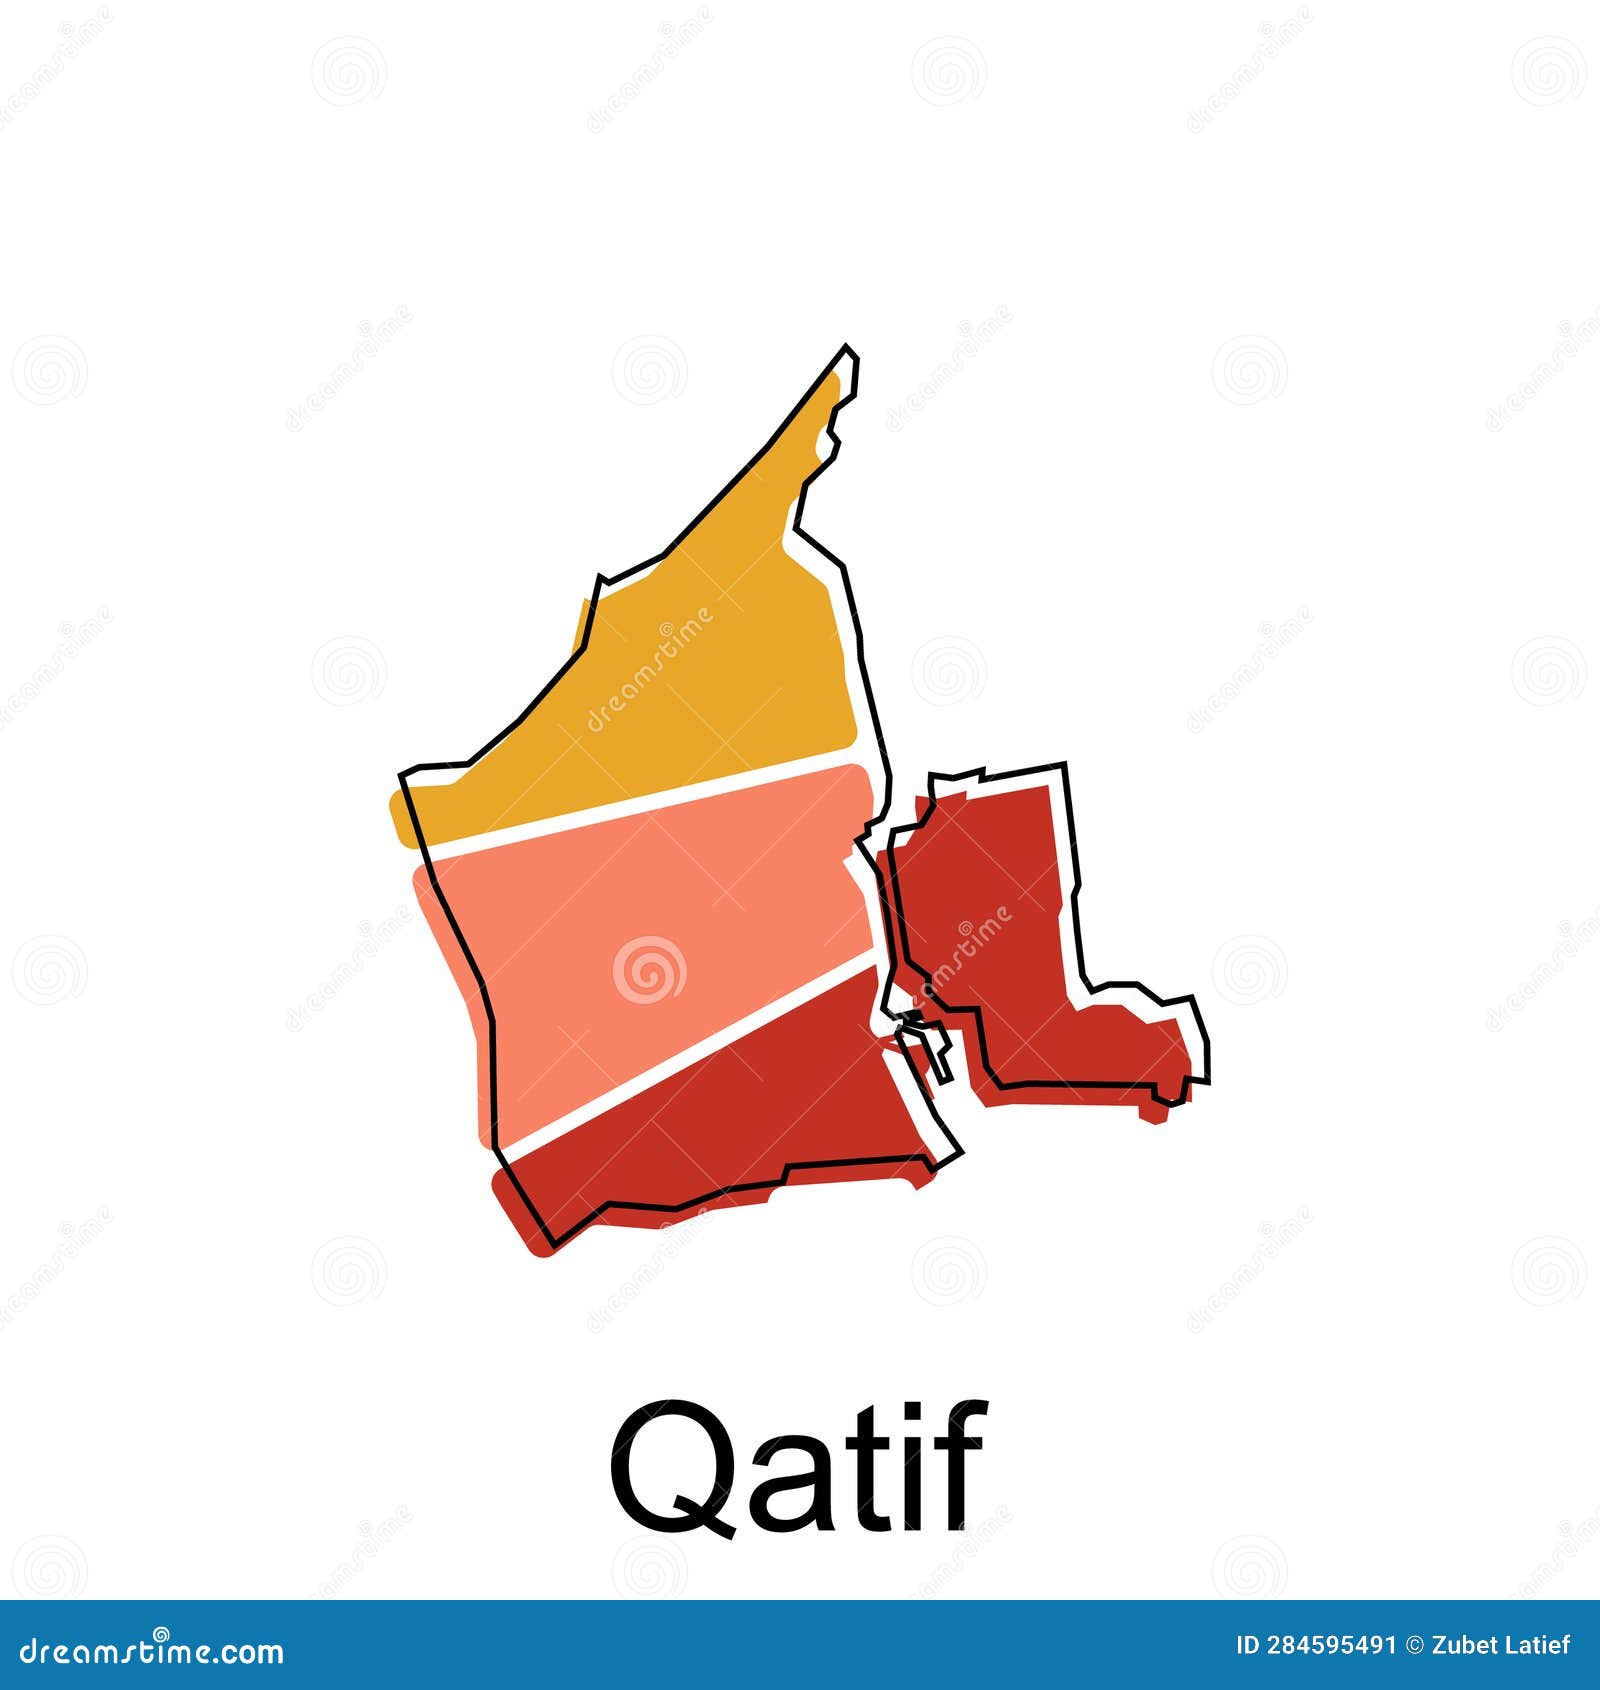 map of qatif  template, world map international  template with outline graphic sketch style  on white